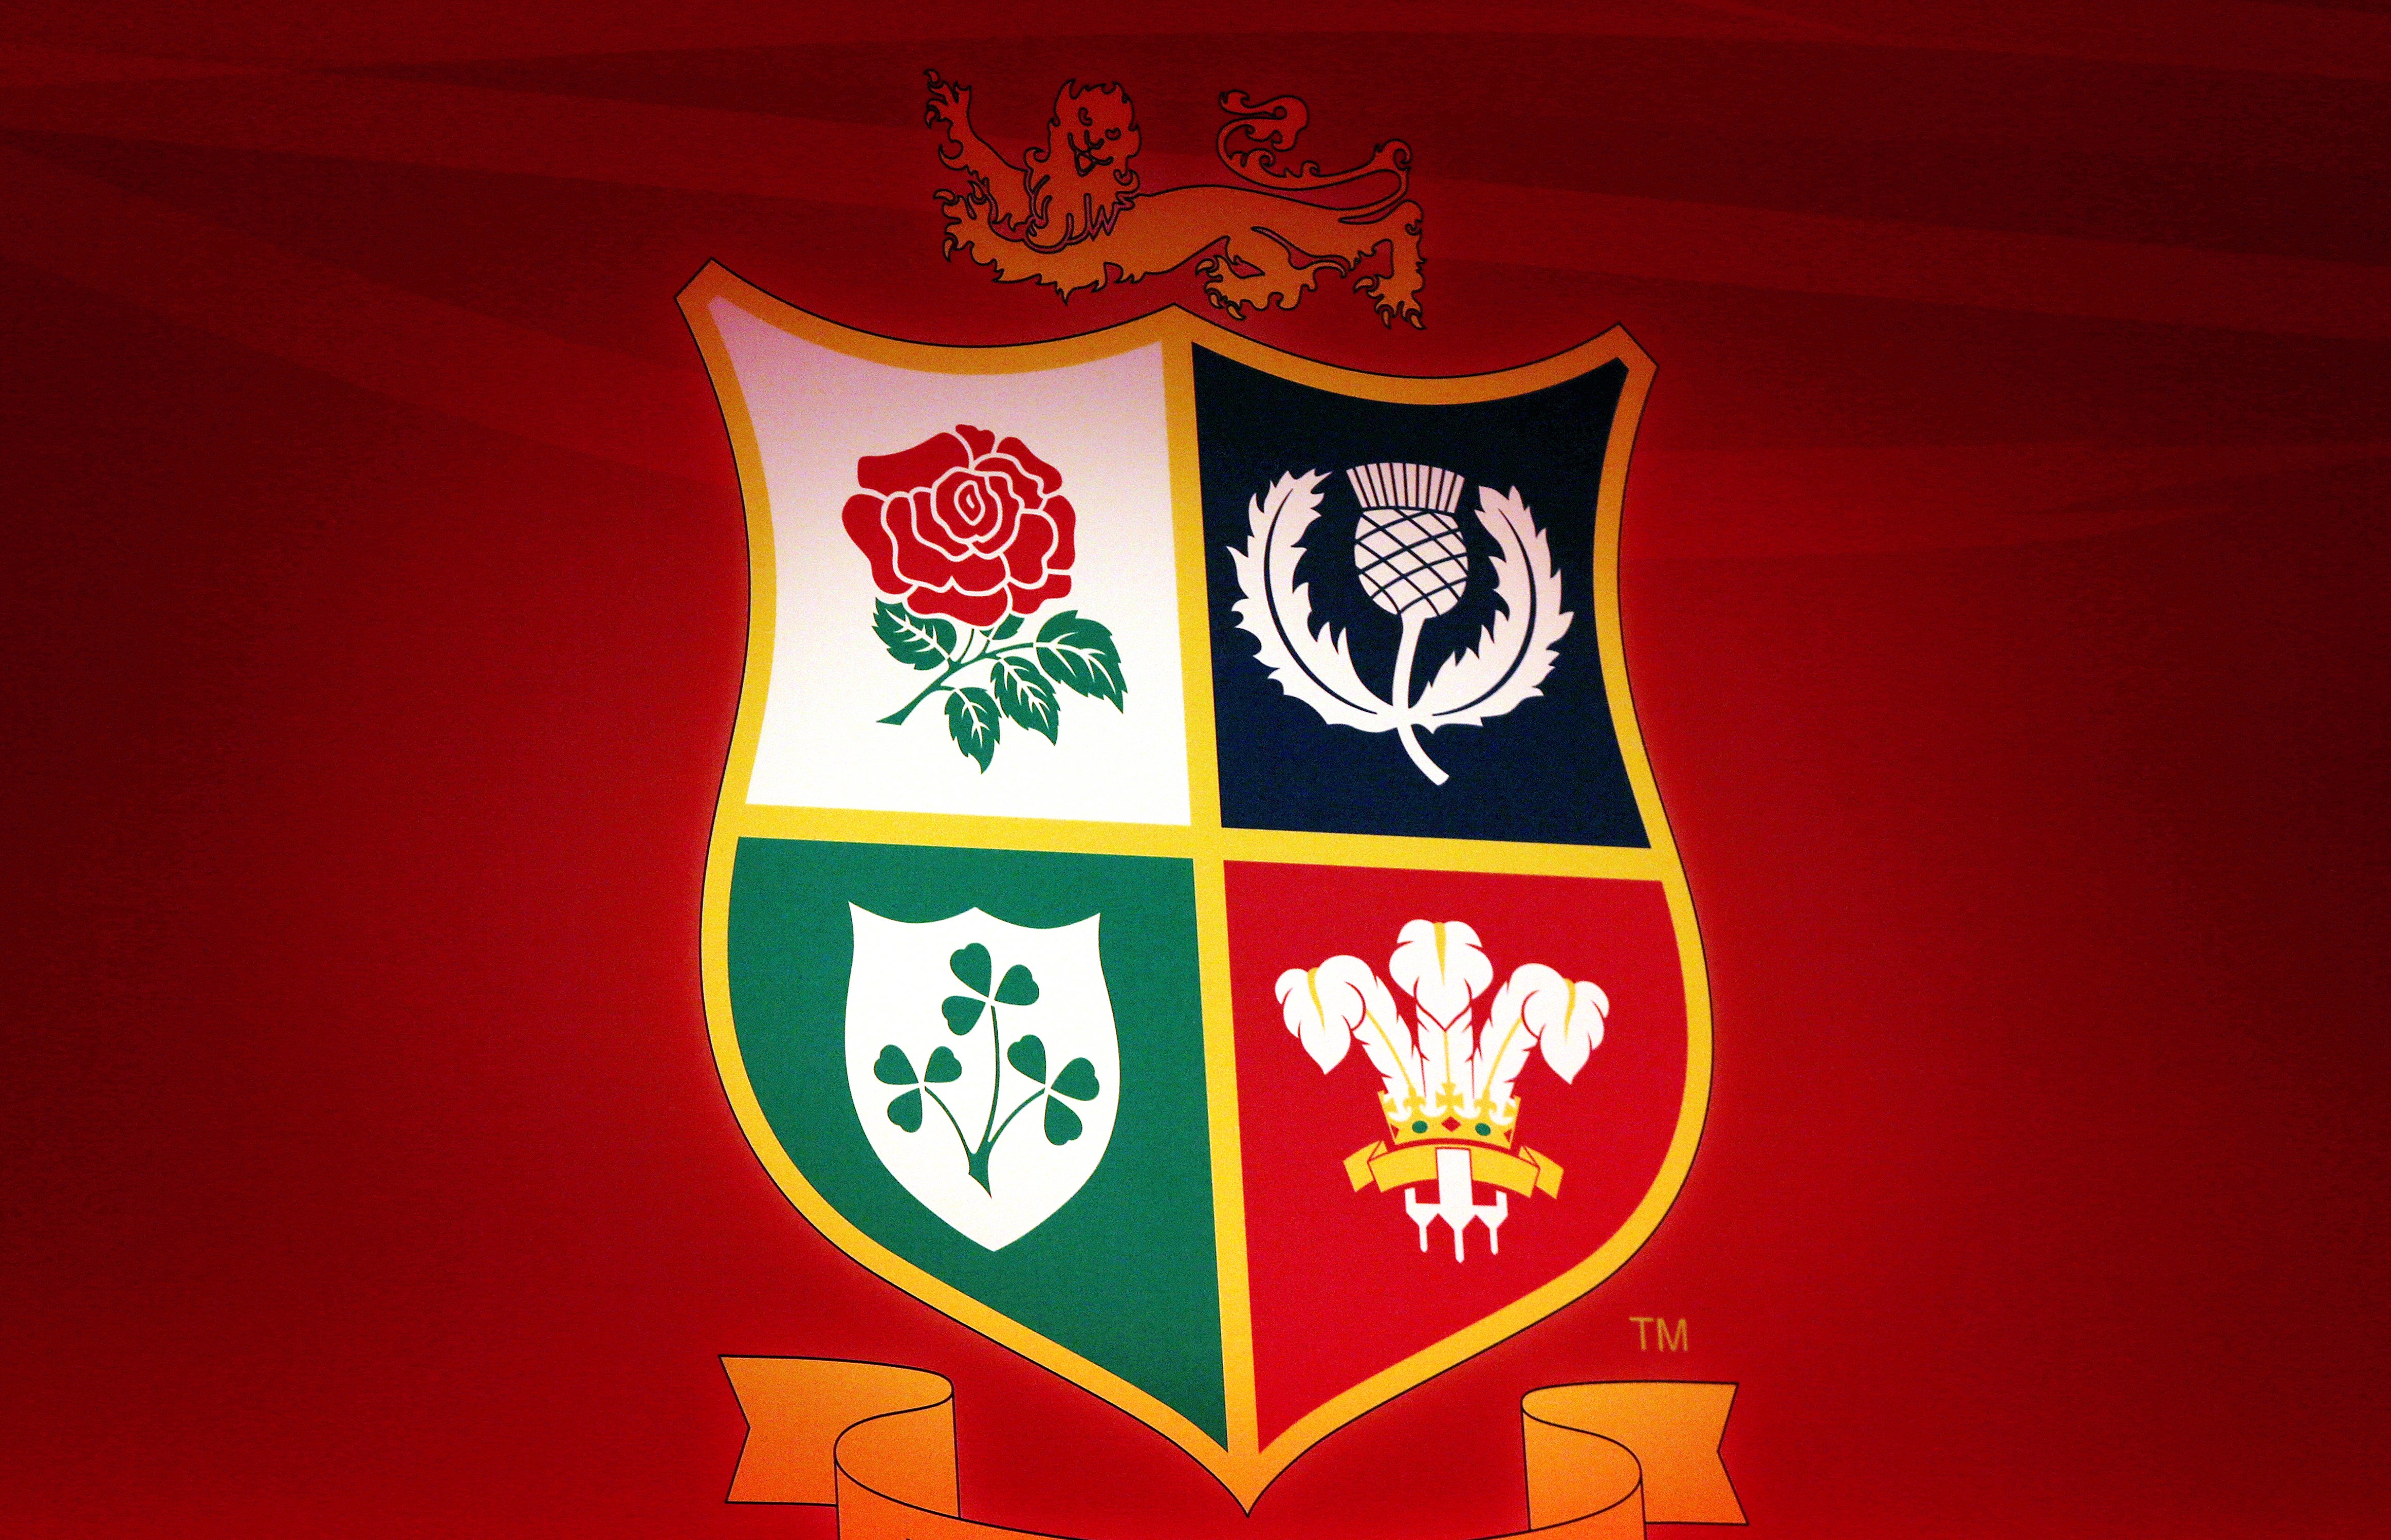 The Lions badge